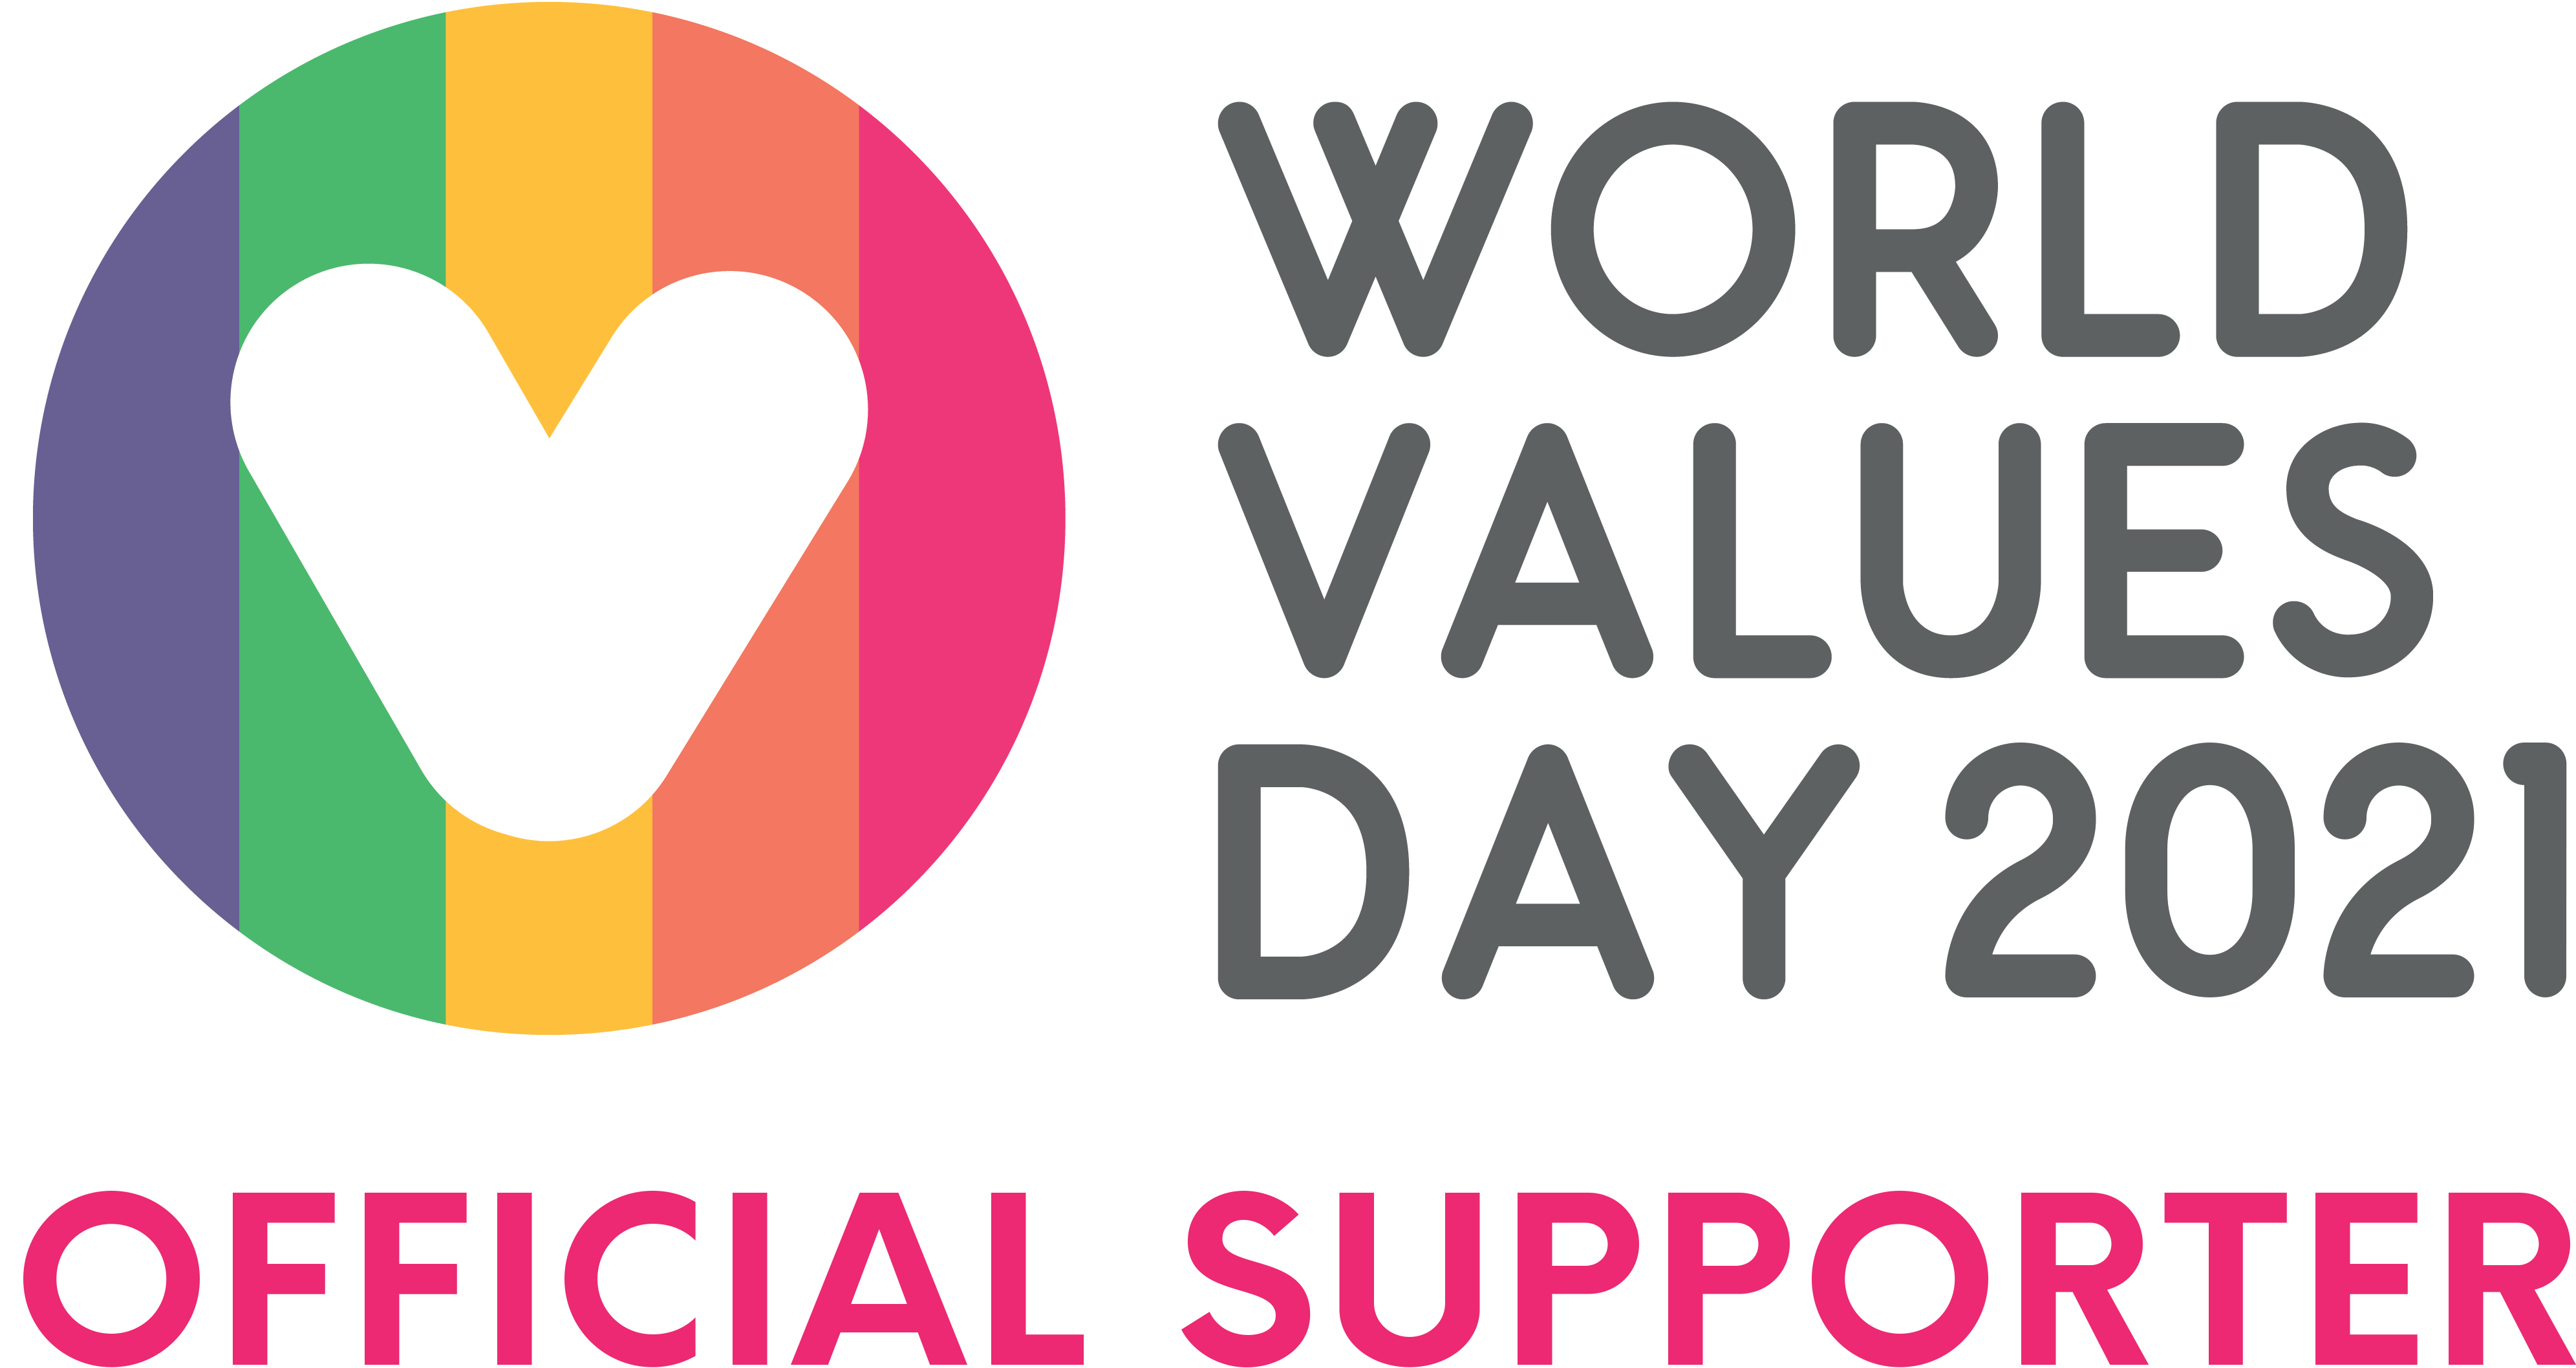 World Values Day 2021 - Offical Supporter